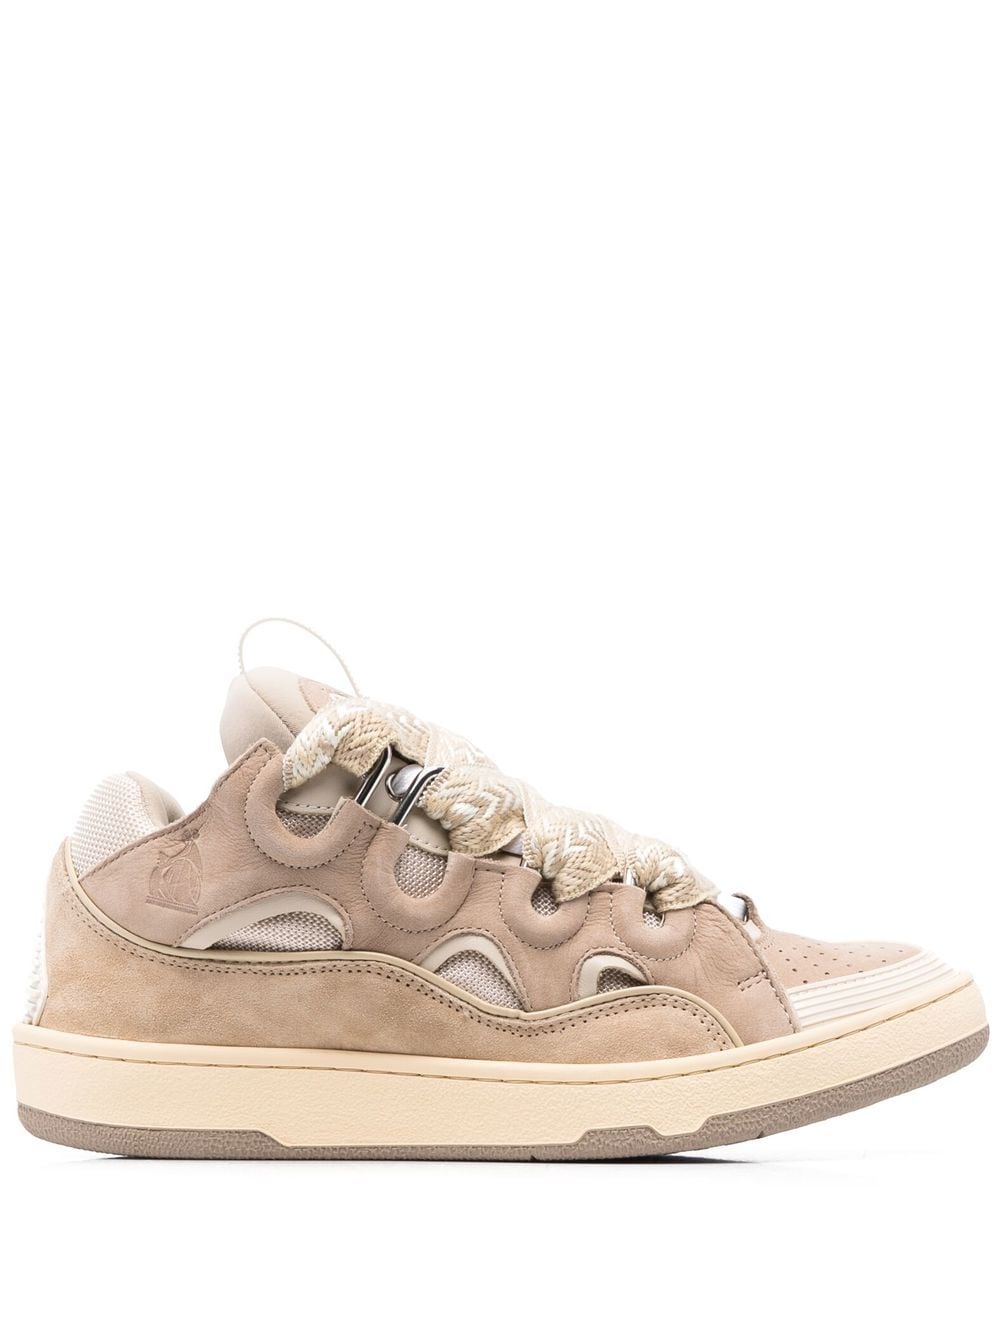 Lanvin chunky lace-up sneakers - Brown von Lanvin